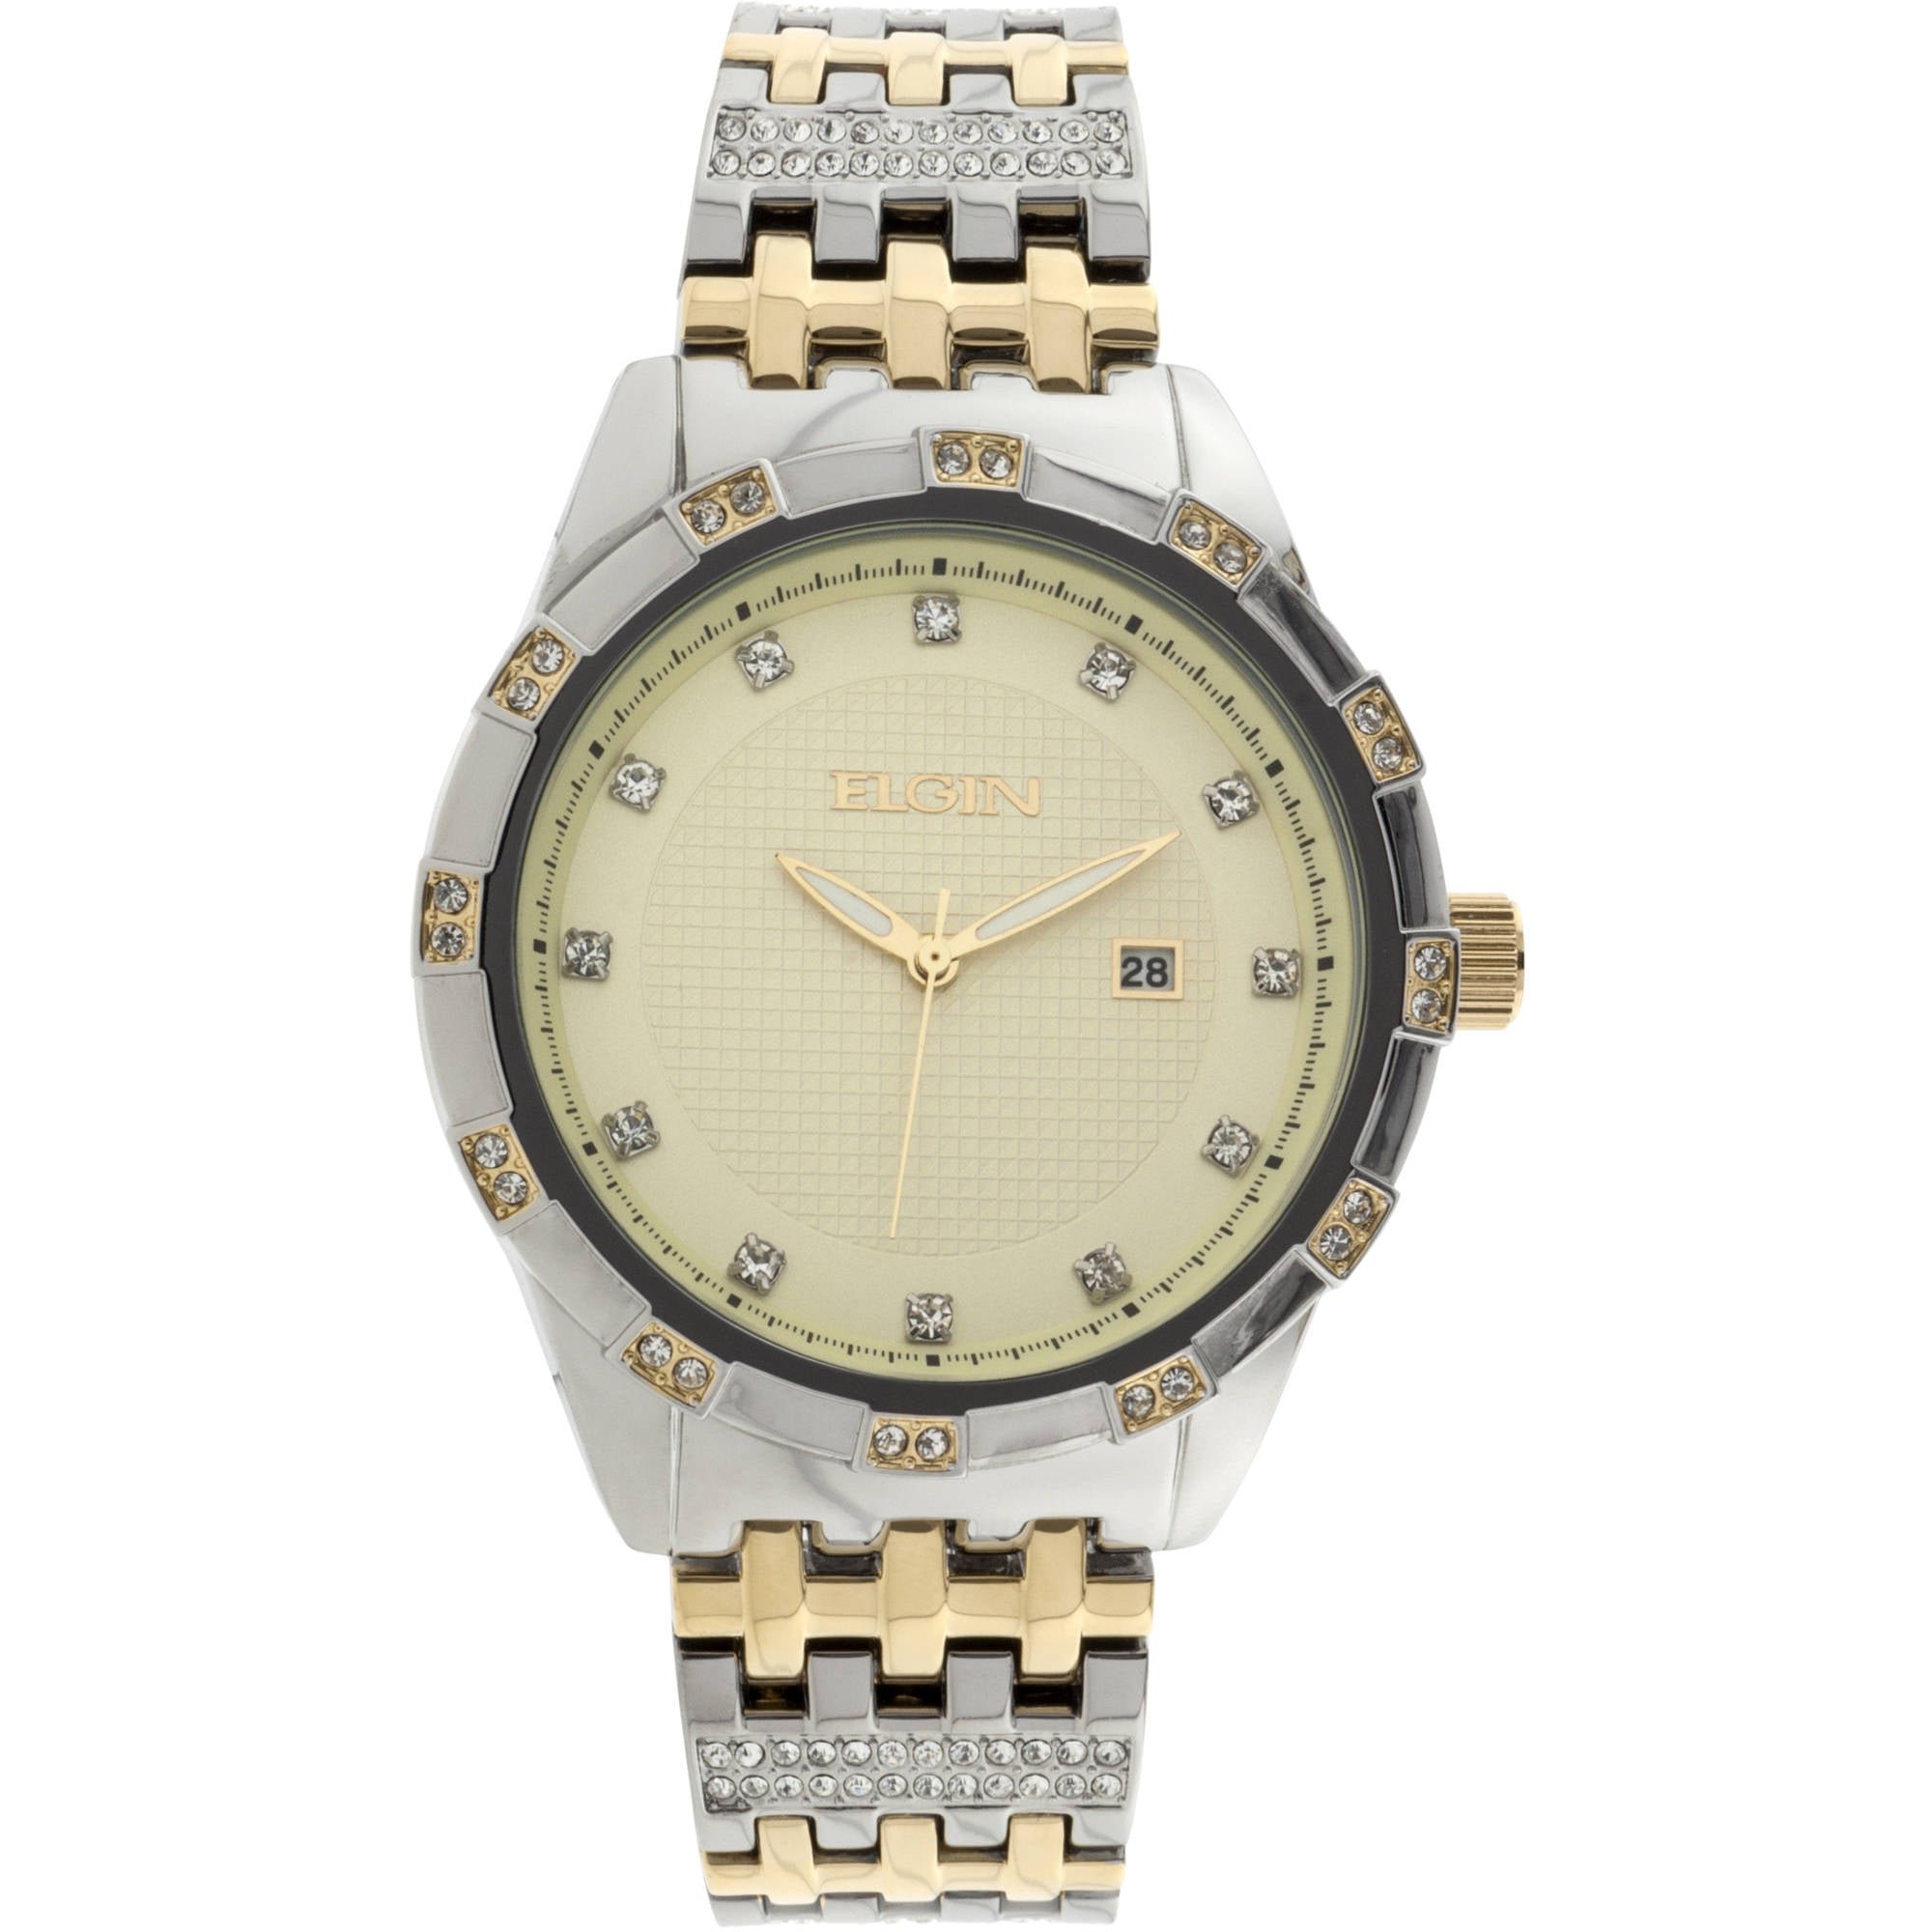 Model: Men's Elgin Two Tone Champagne Dial Crystal Accented Bracelet Watch